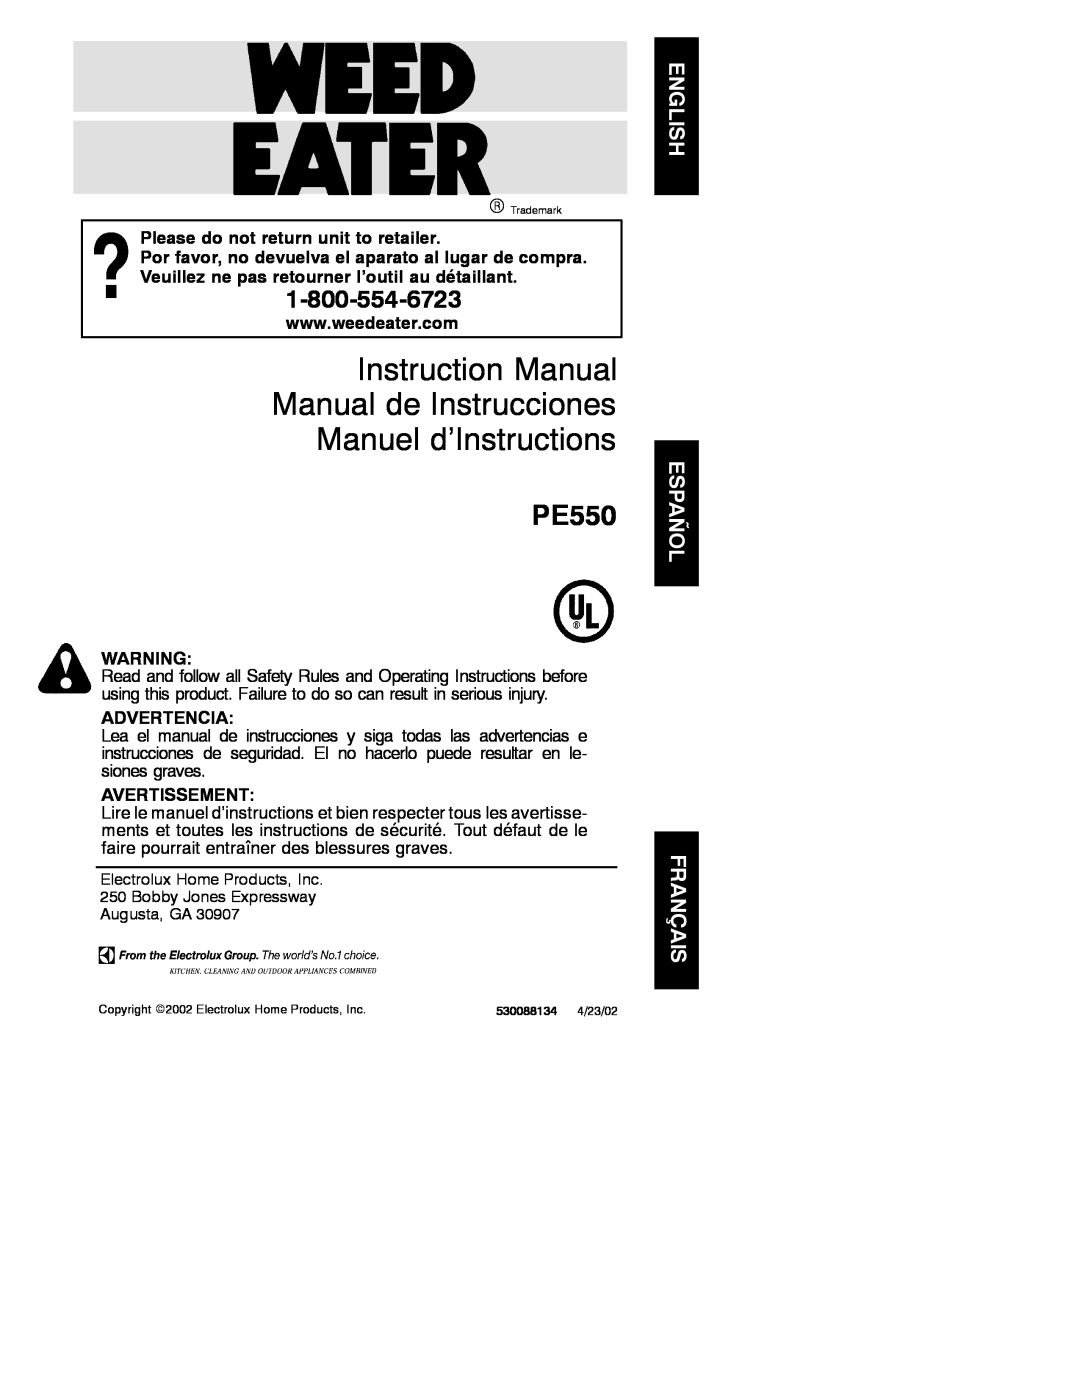 Weed Eater PE550 instruction manual Please do not return unit to retailer, Advertencia, Avertissement 